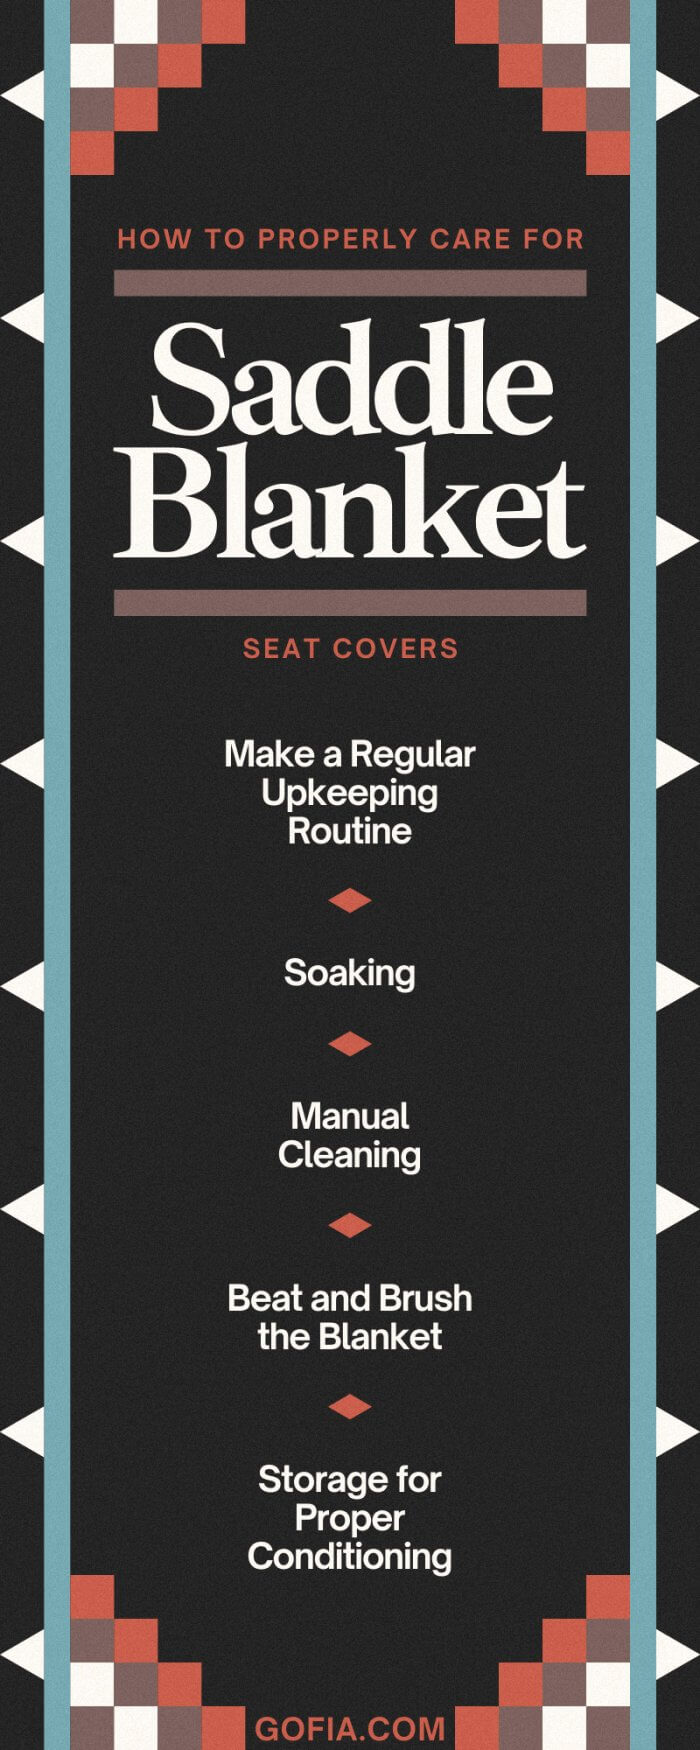 How To Properly Care for Saddle Blanket Seat Covers